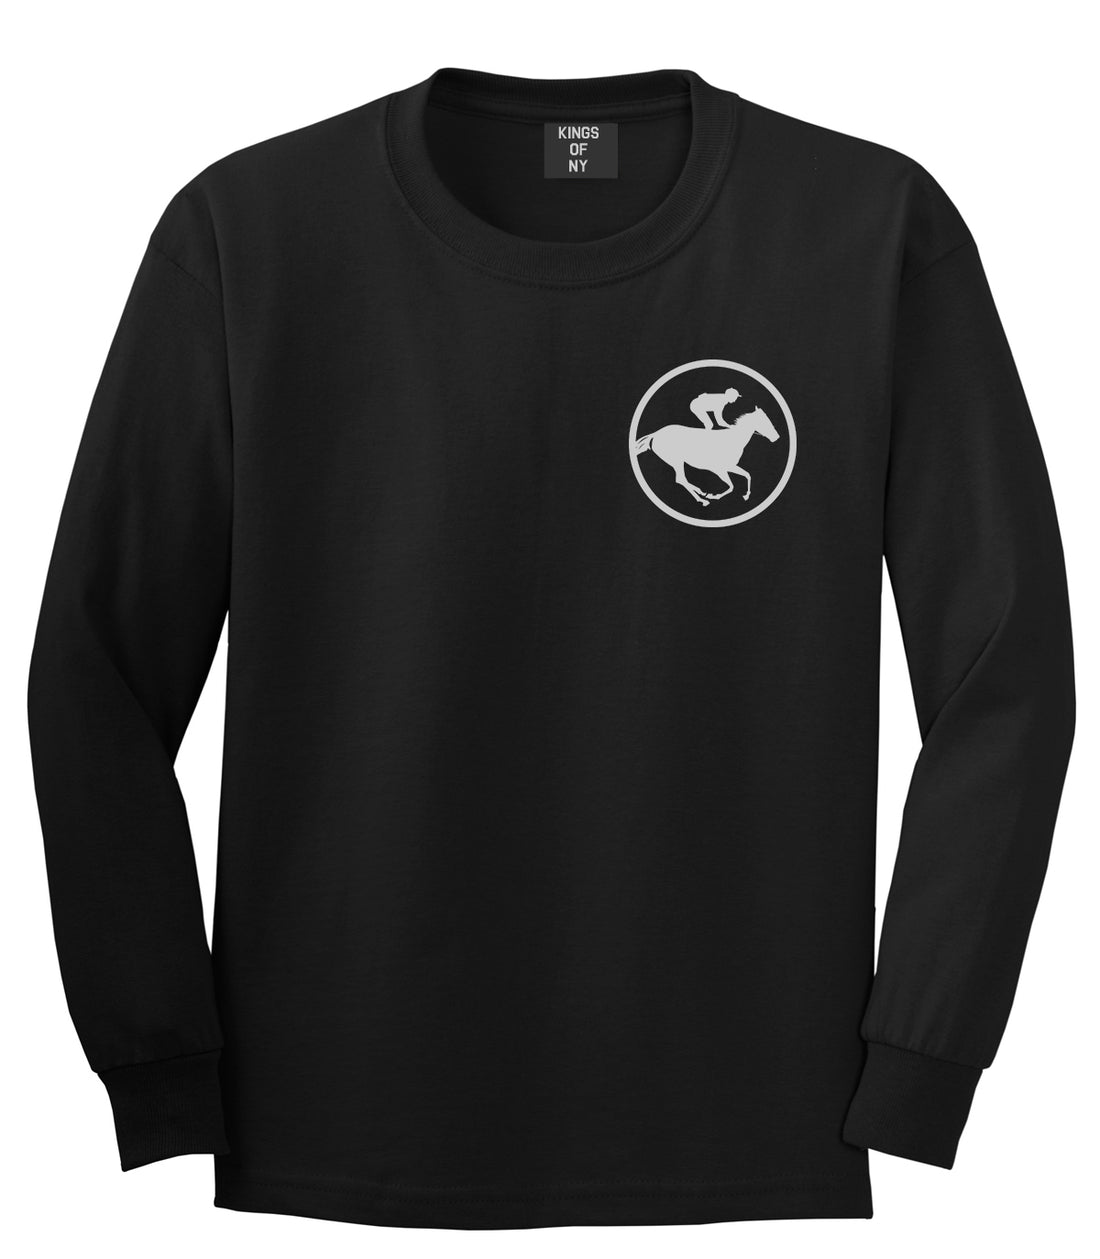 Derby Horse Racing Chest Mens Black Long Sleeve T-Shirt by Kings Of NY